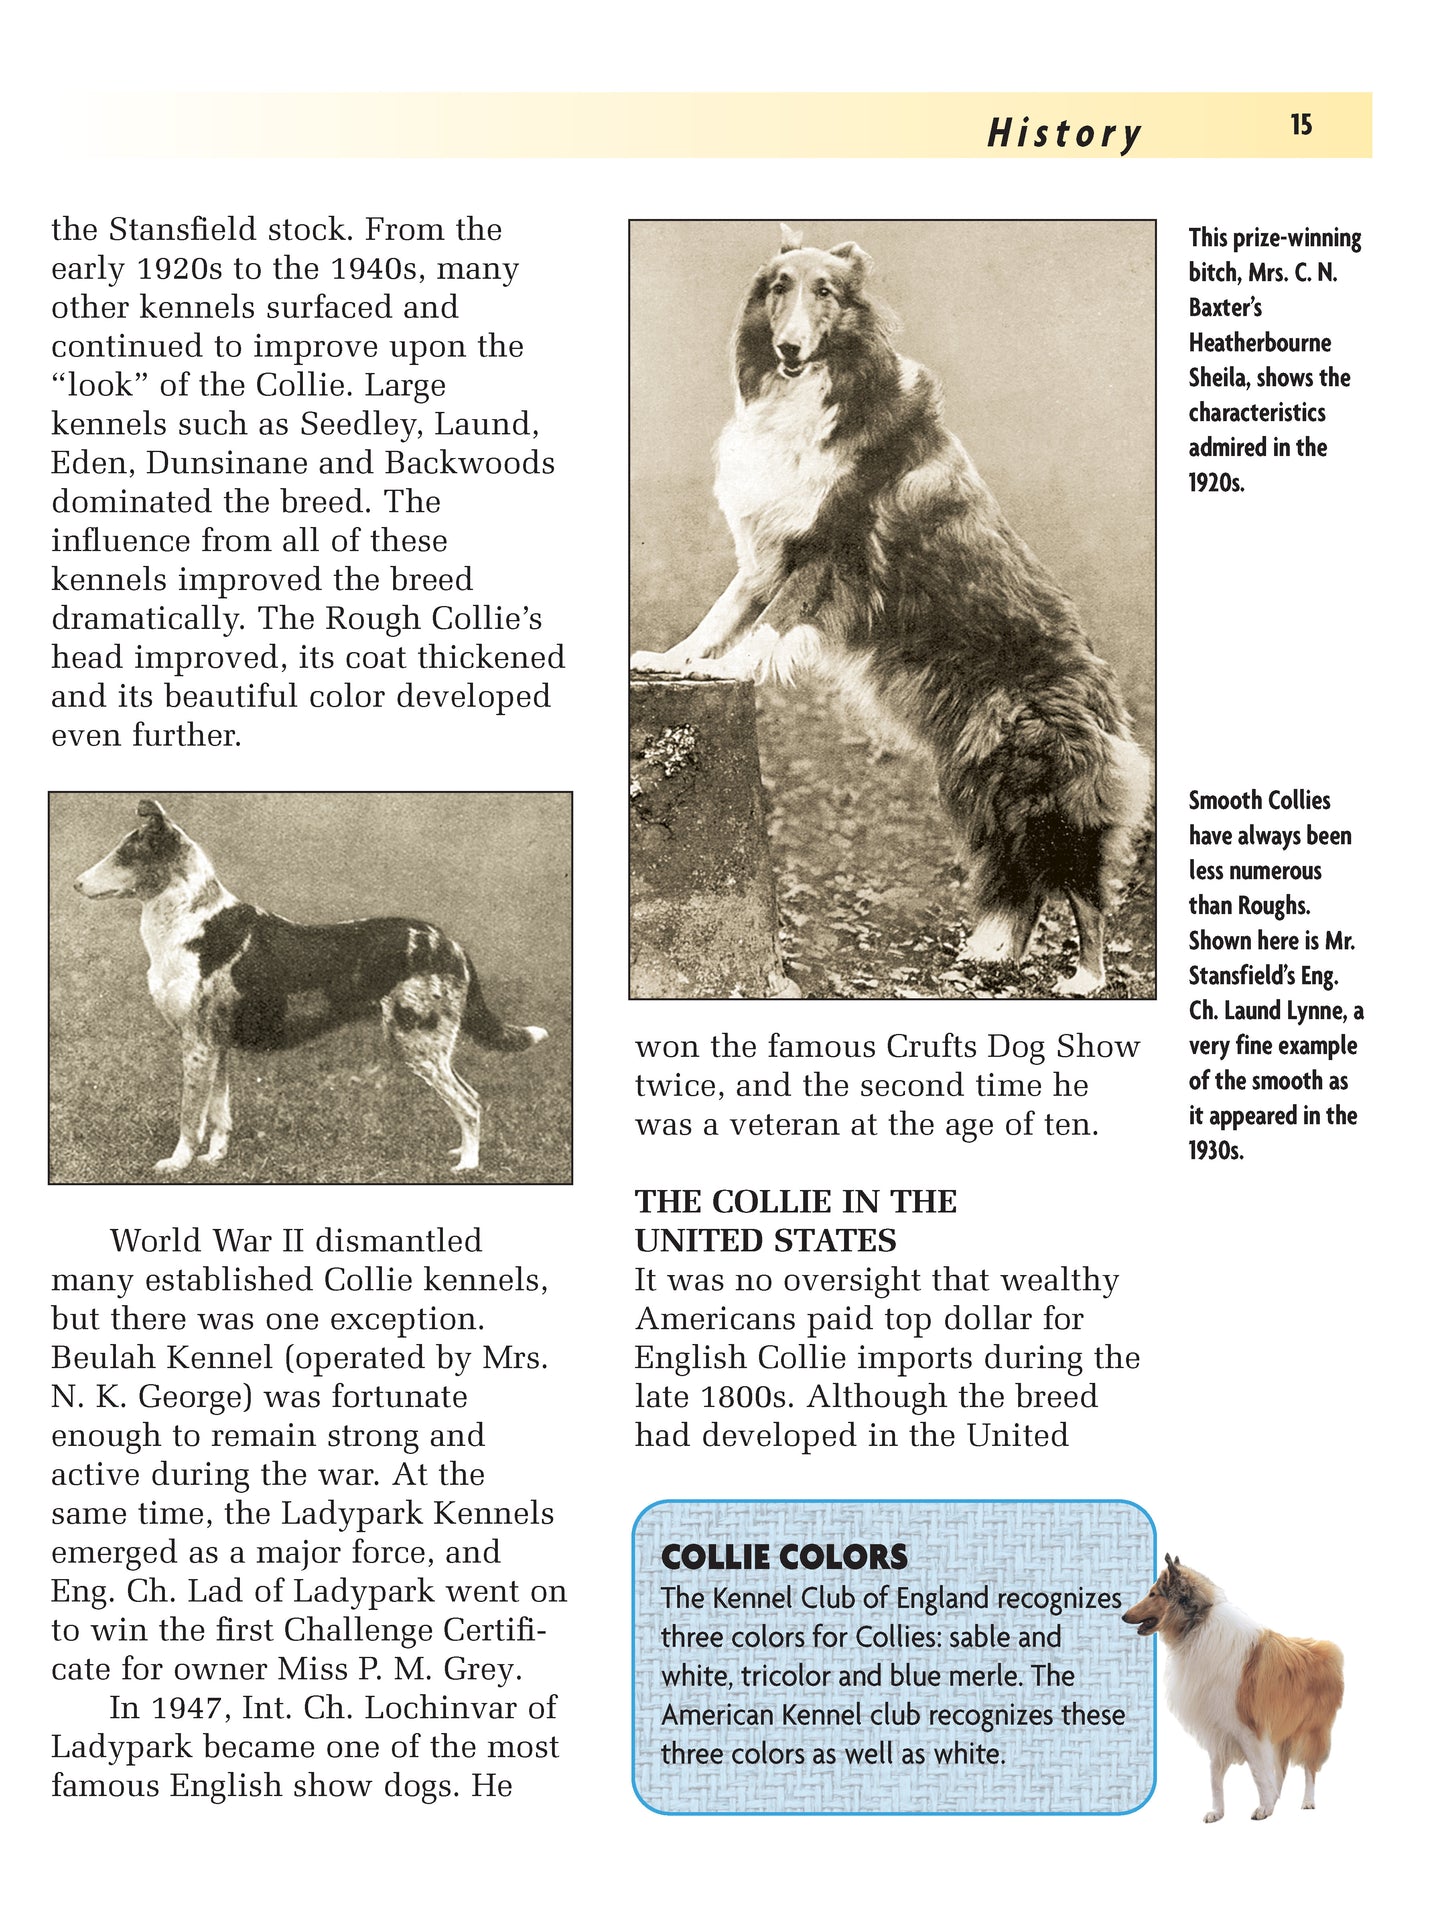 Collie (Comprehensive Owner's Guide)